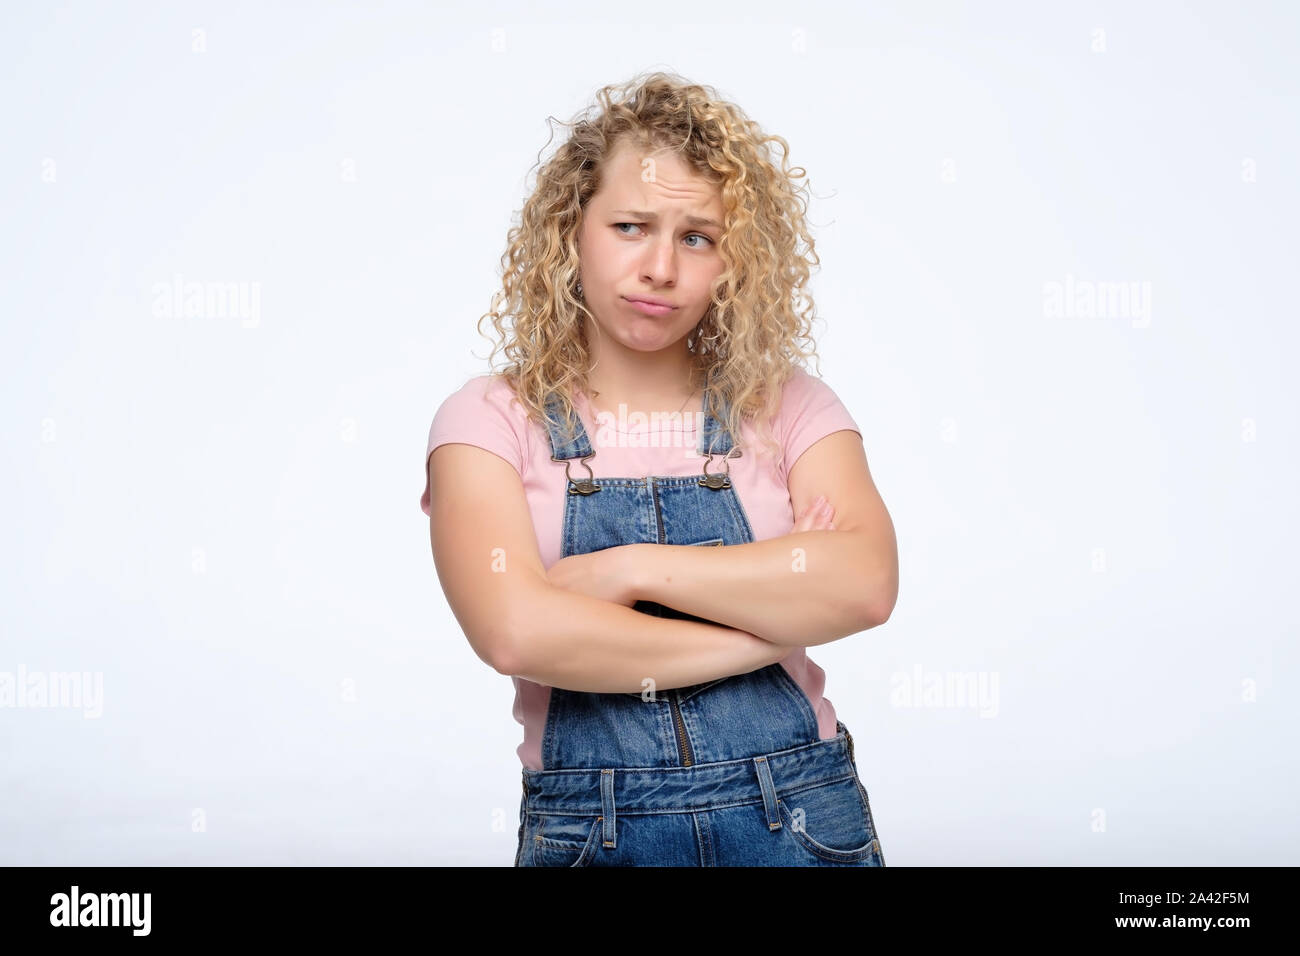 Blonde woman standing with arms folded and looking away Stock Photo